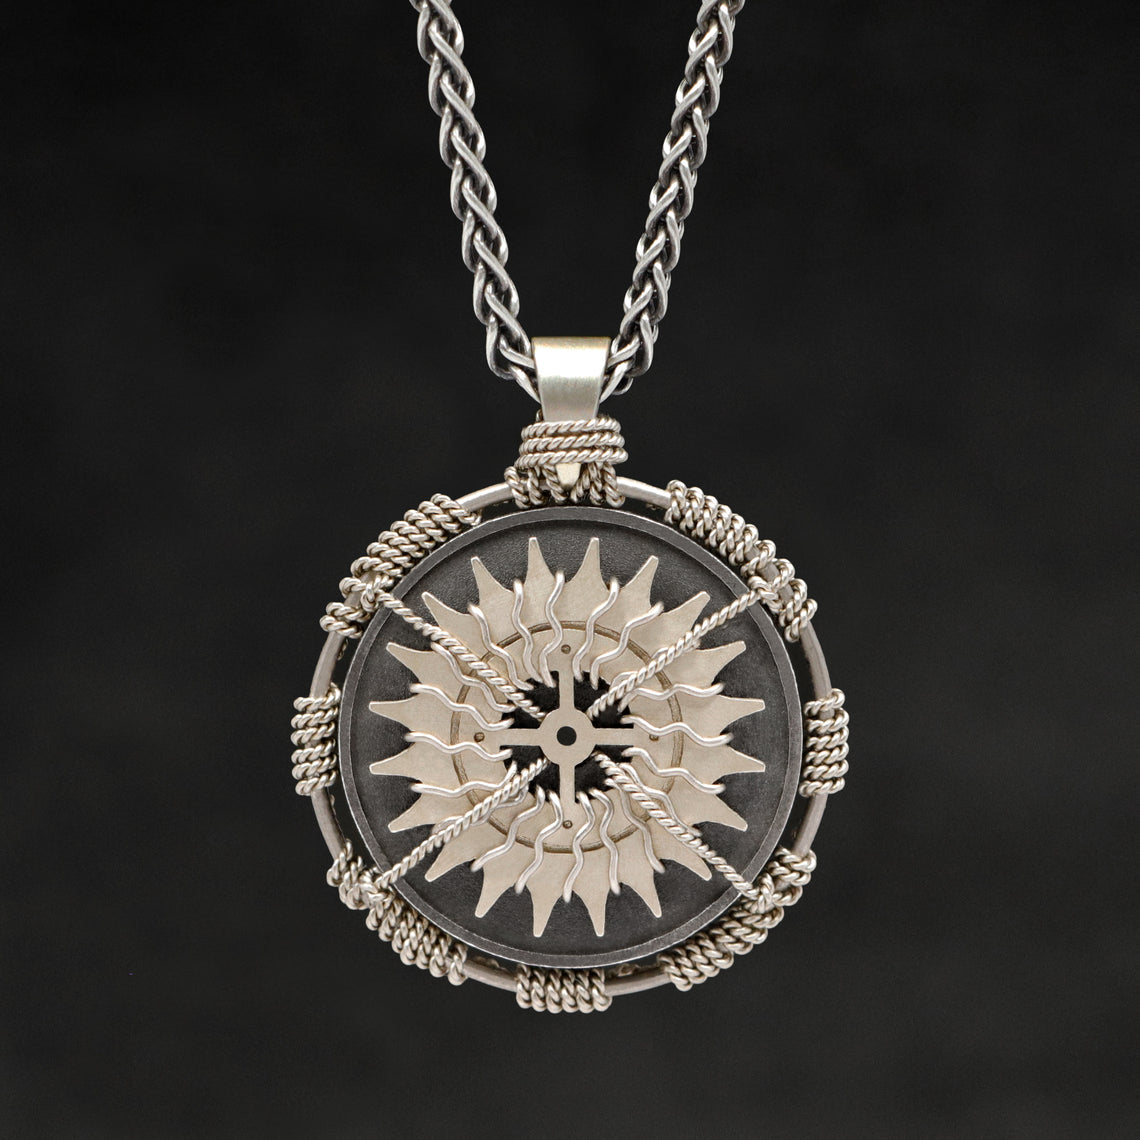 Hanging front view of 18K Palladium White Gold and Sterling Silver Sewn Gold Metal Compass pendant and chain with endless loop necklace featuring 20 pointed gear by Caps Brothers